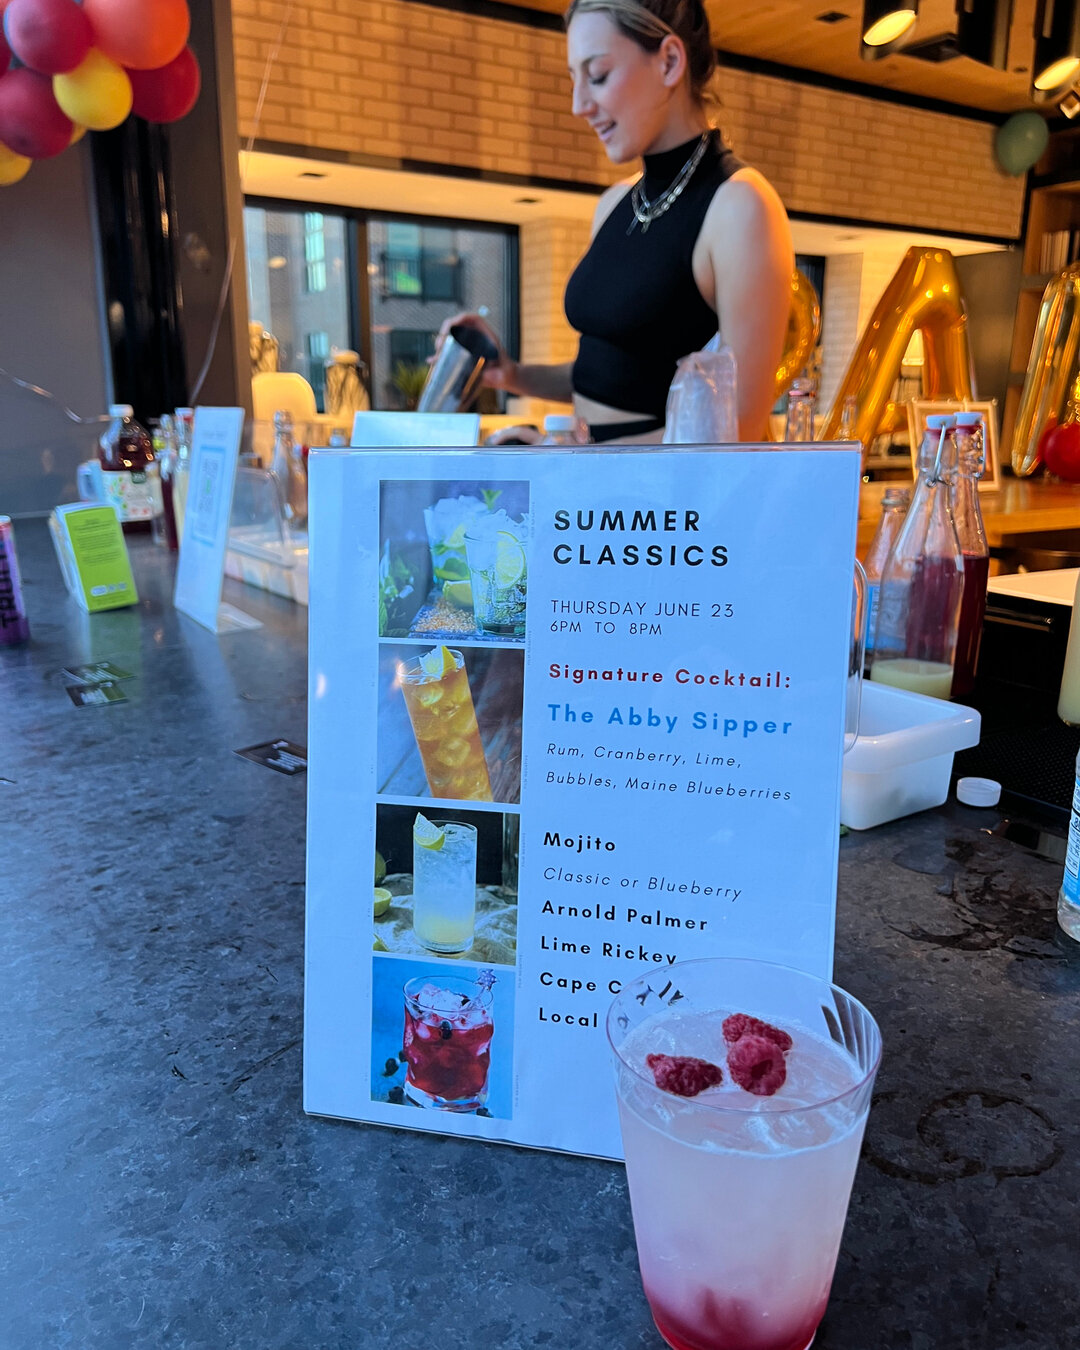 A few weeks ago we hosted a SUMMER CLASSICS Pop up at the Abby. Residents enjoyed favorites like Arnold Palmers, Lime Rickey, and of course the signature cocktail: The Abby Sipper - rum, cranberry, lime, bubbles, and Maine blueberries! ​​​​​​​​
​​​​​